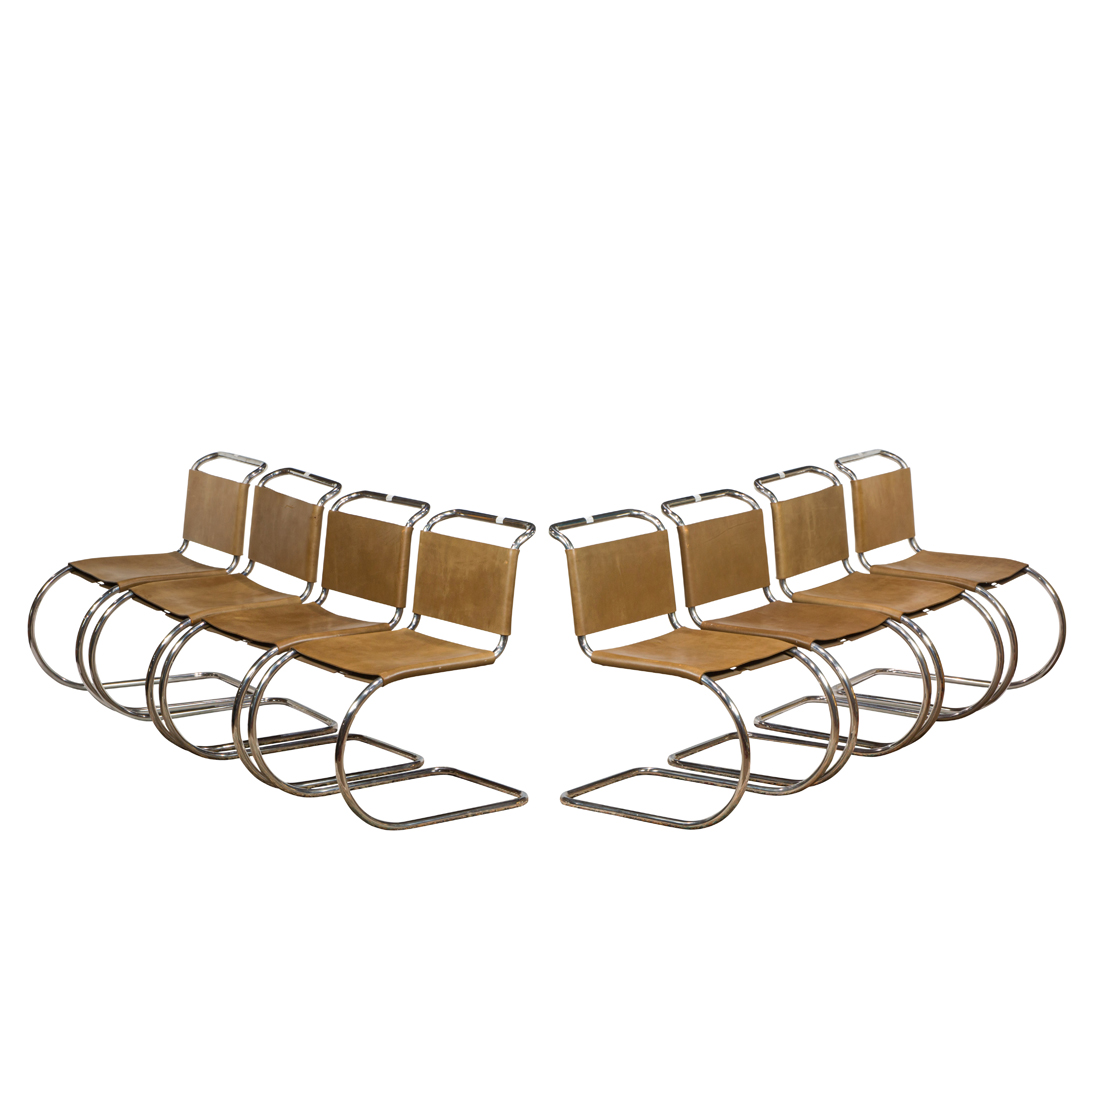 LUDWIG MIES VAN DER ROHE MR CHAIRS  3a17d8